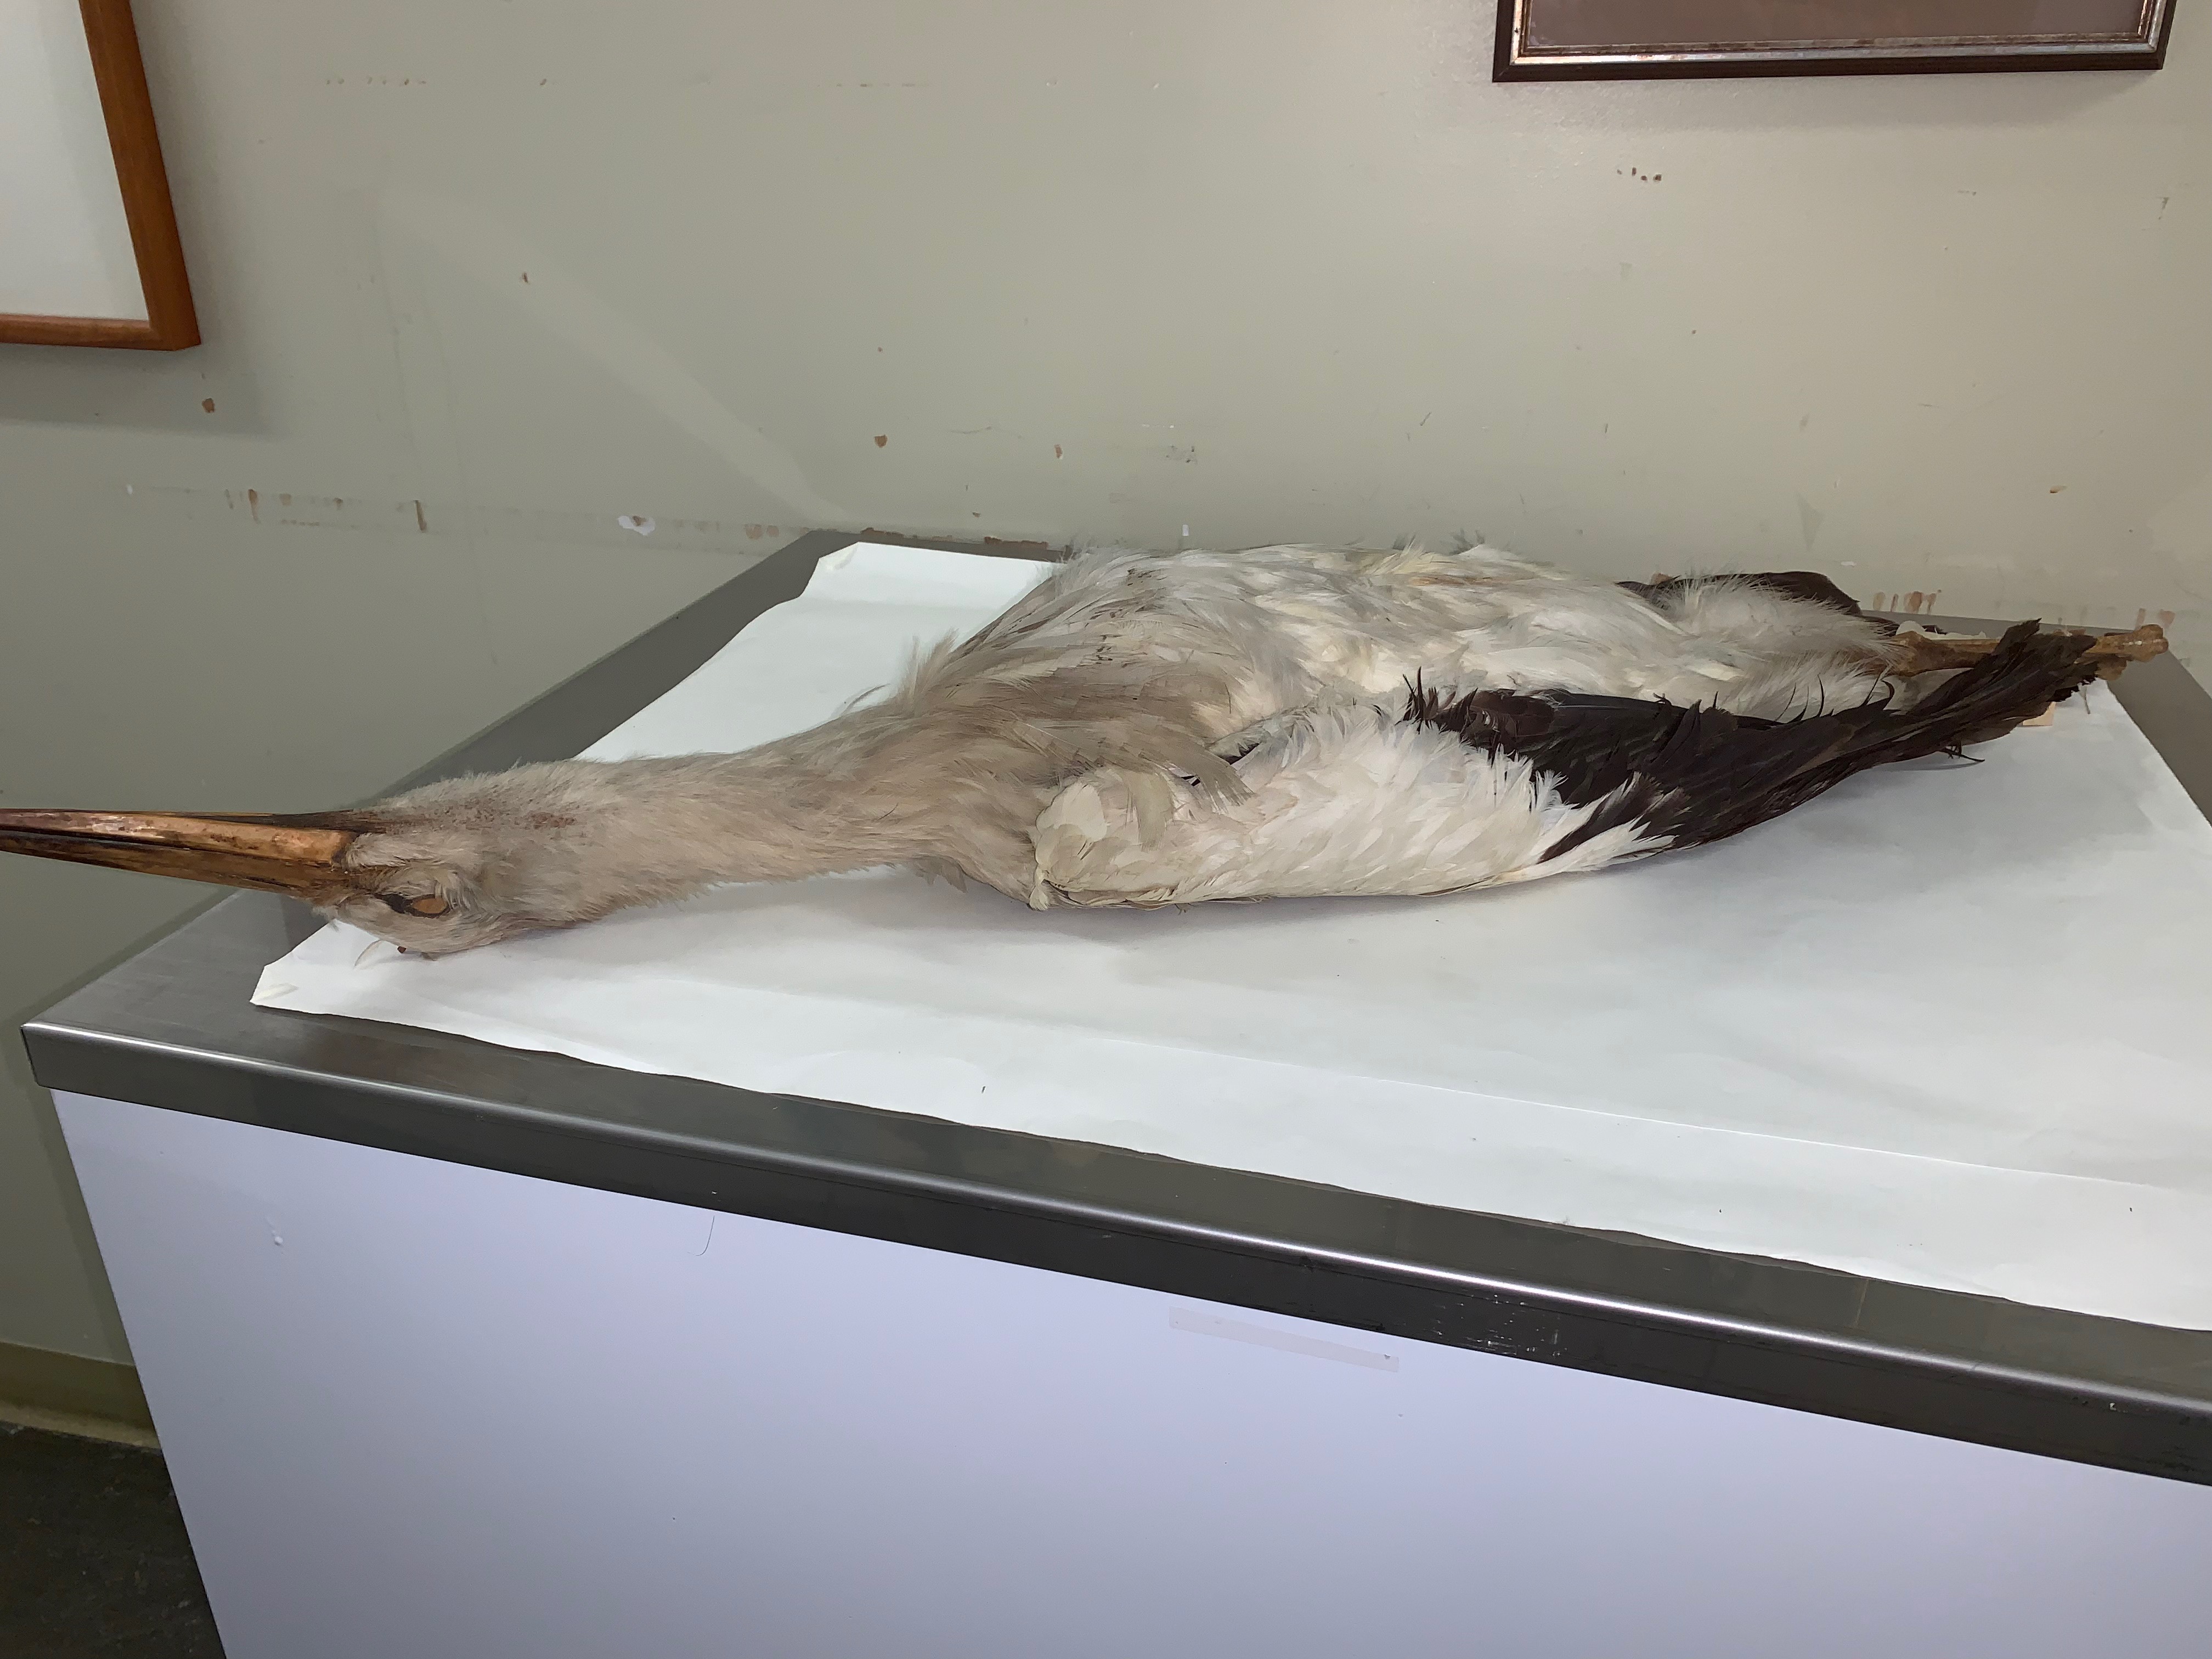 Preserved stork specimen from the Academy's collection